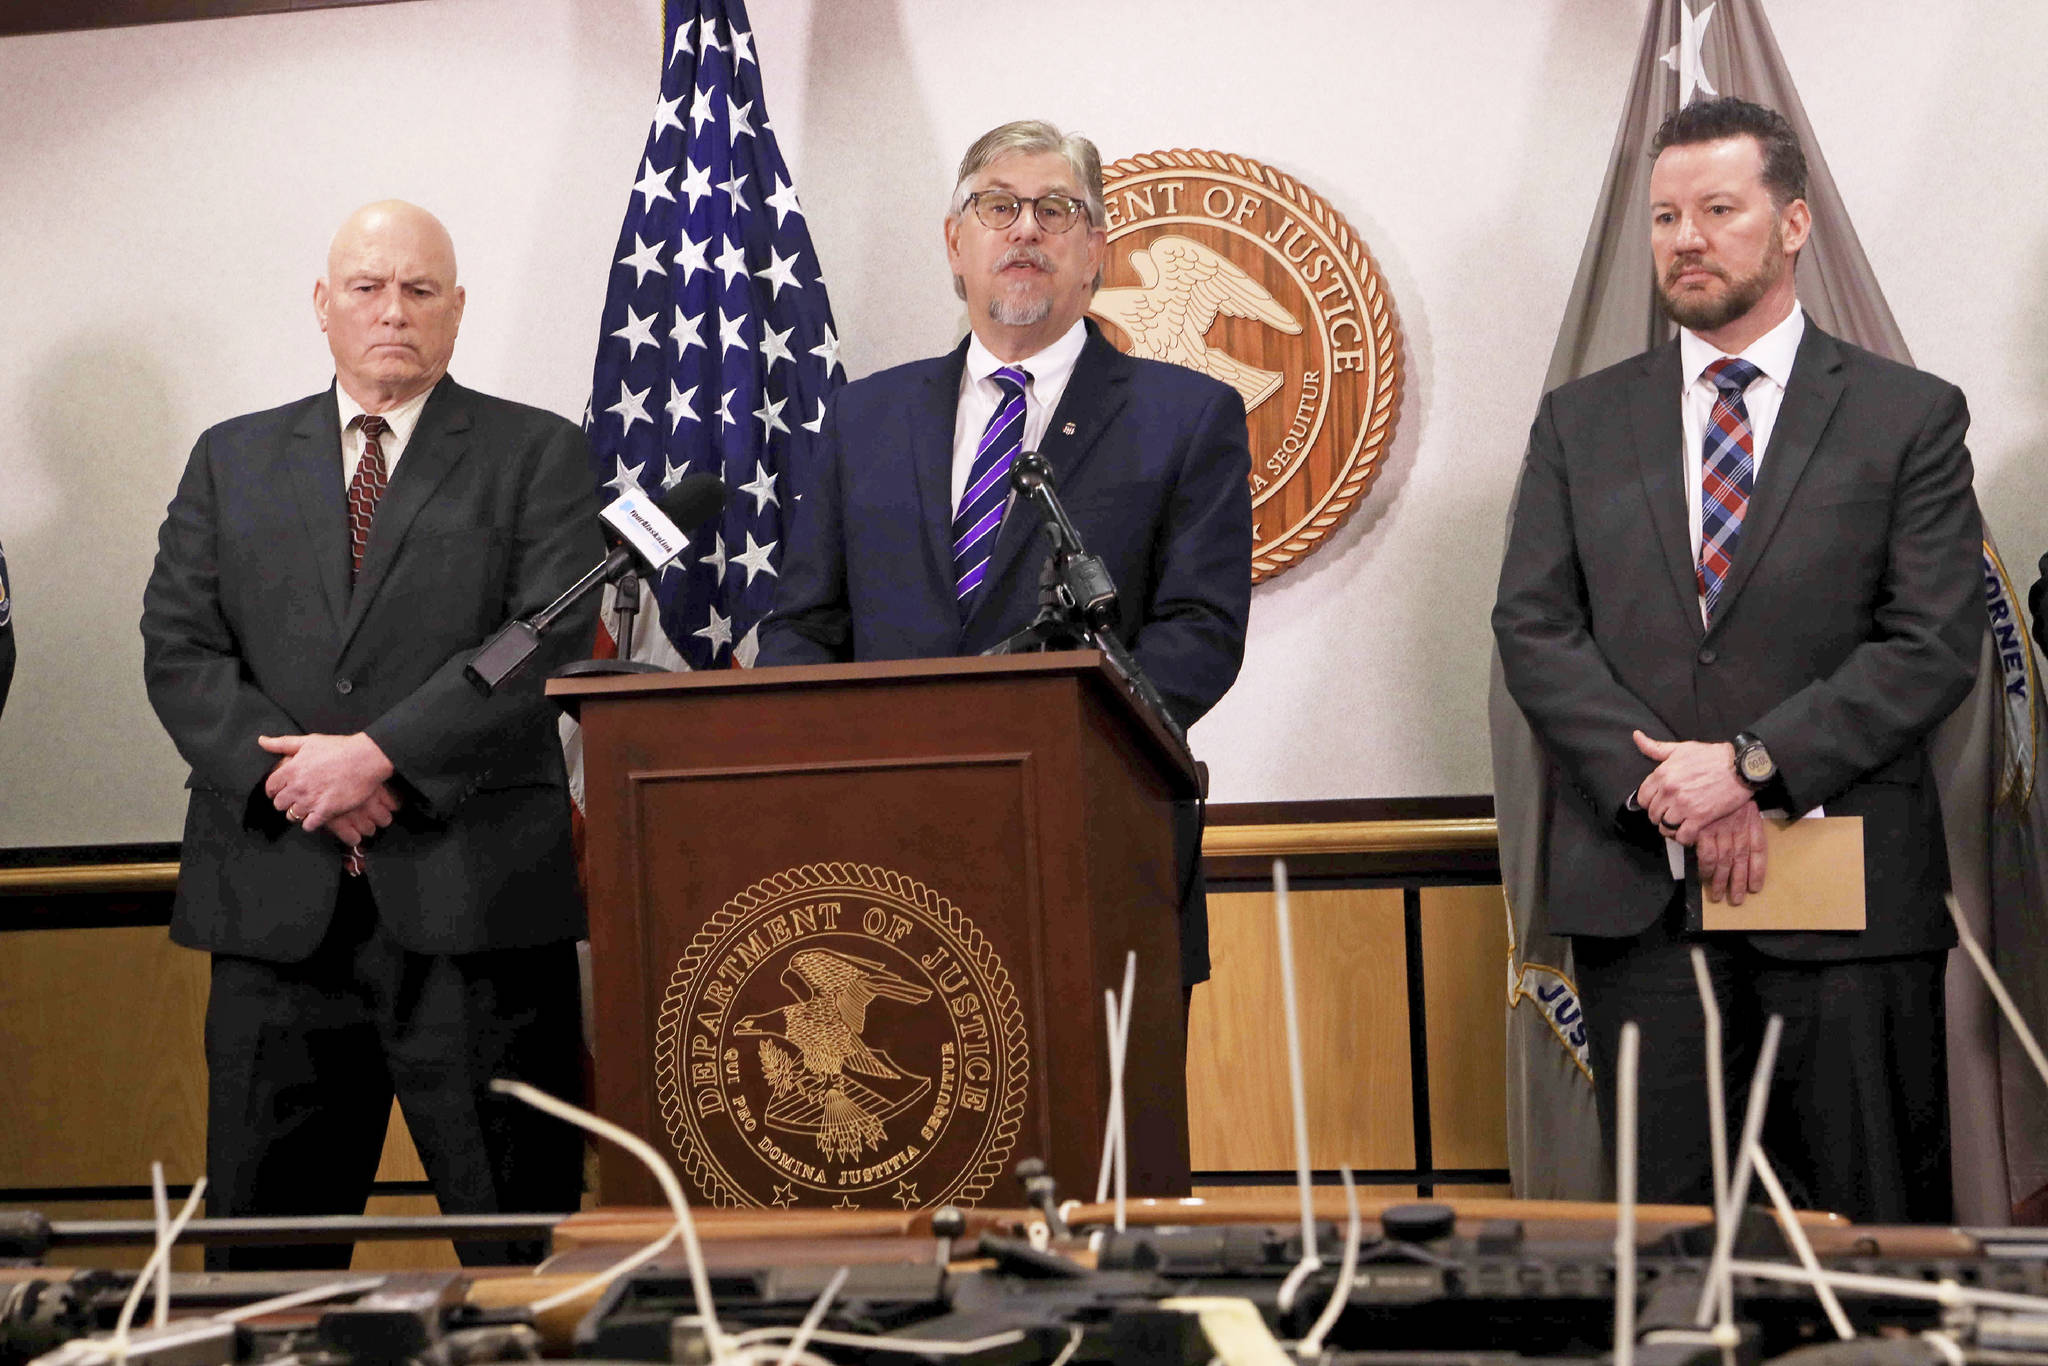 Bryan Schroder, center, U.S. attorney for Alaska, speaks at a press conference announcing the seizure of 82 illegally possessed guns in Anchorage and surrounding communities on Wednesday, Feb. 26, 2020, in Anchorage, Alaska. U.S Marshal Rob Heun, left, and Darek Pleasants of the Bureau of Alcohol, Tobacco and Firearms, right, look on. The investigation resulted in federal charges against 16 people for firearm or drug trafficking counts. (AP Photo/Dan Joling)